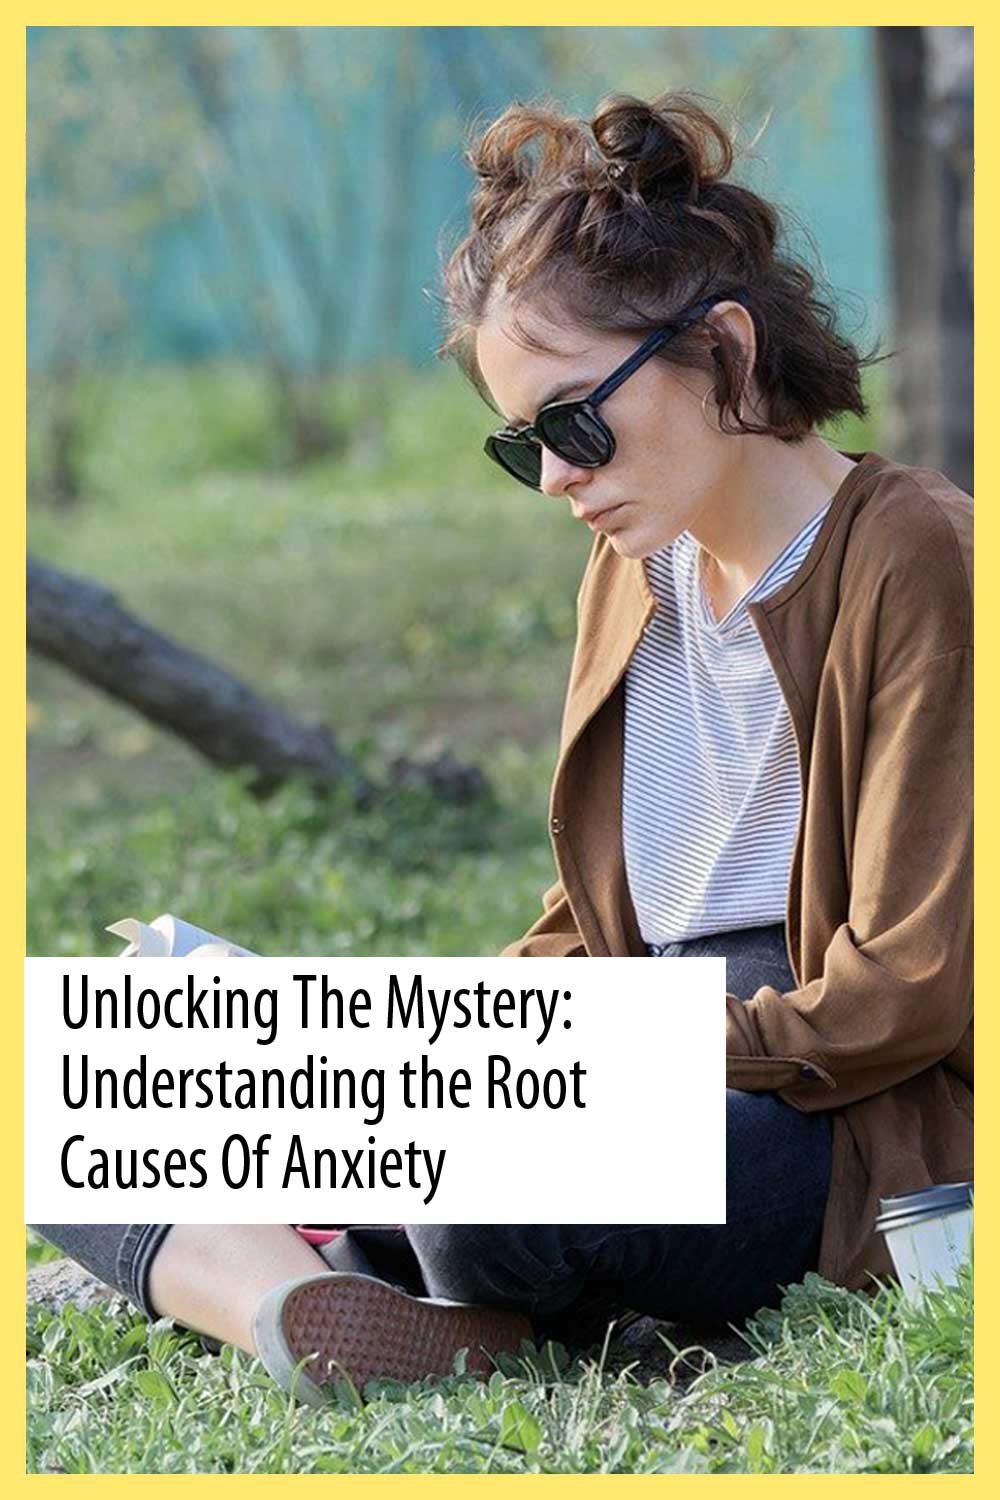 Unlocking the Mystery: Understanding the Root Causes of Anxiety